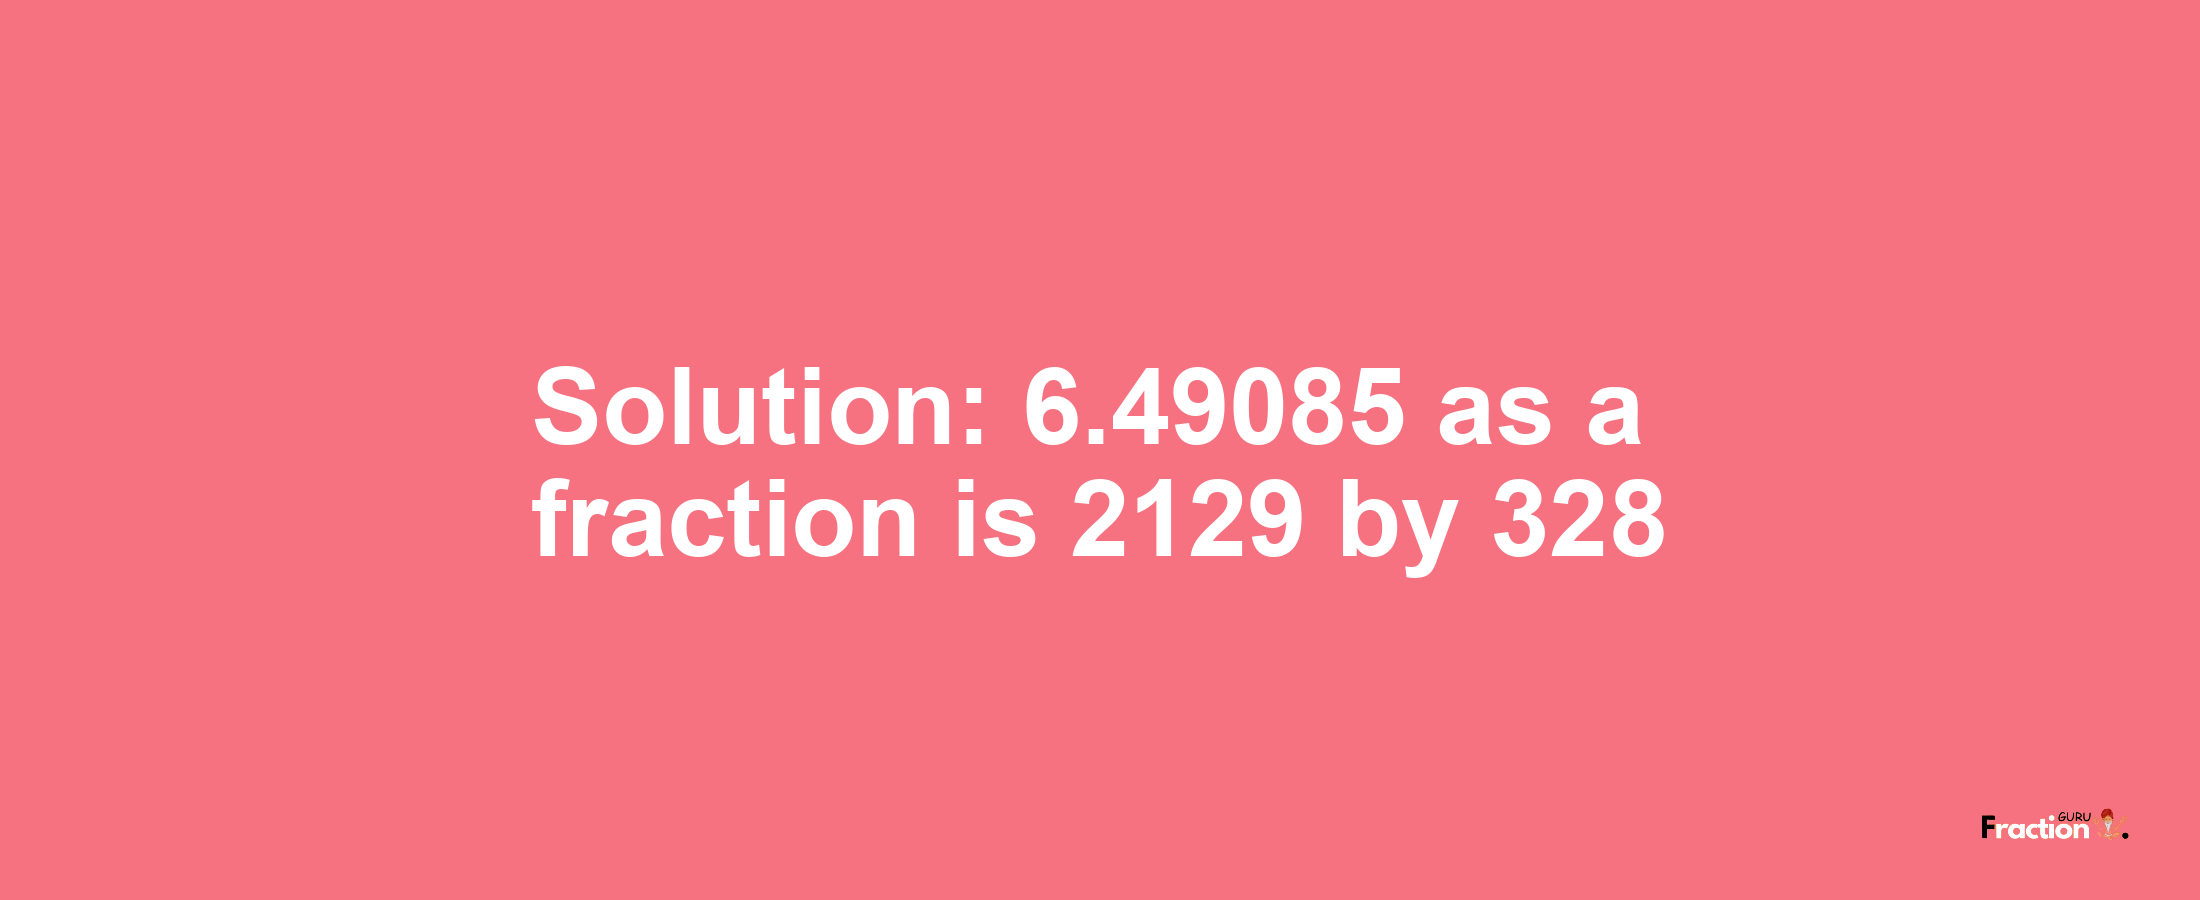 Solution:6.49085 as a fraction is 2129/328